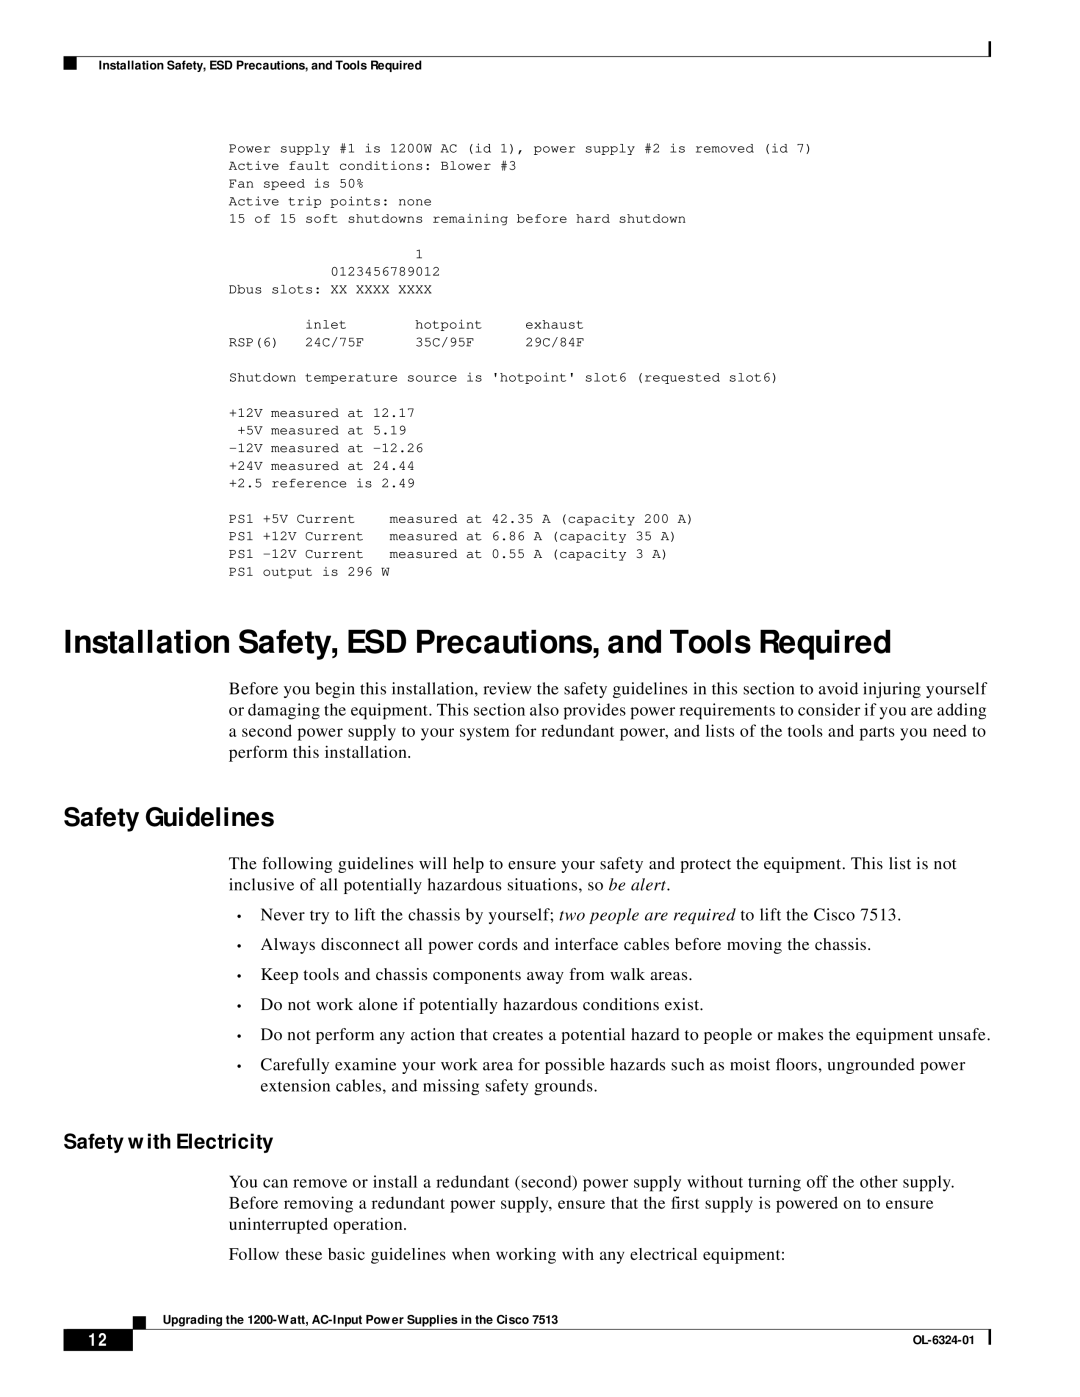 Cisco Systems 7513 Installation Safety, ESD Precautions, and Tools Required, Safety Guidelines, Safety with Electricity 